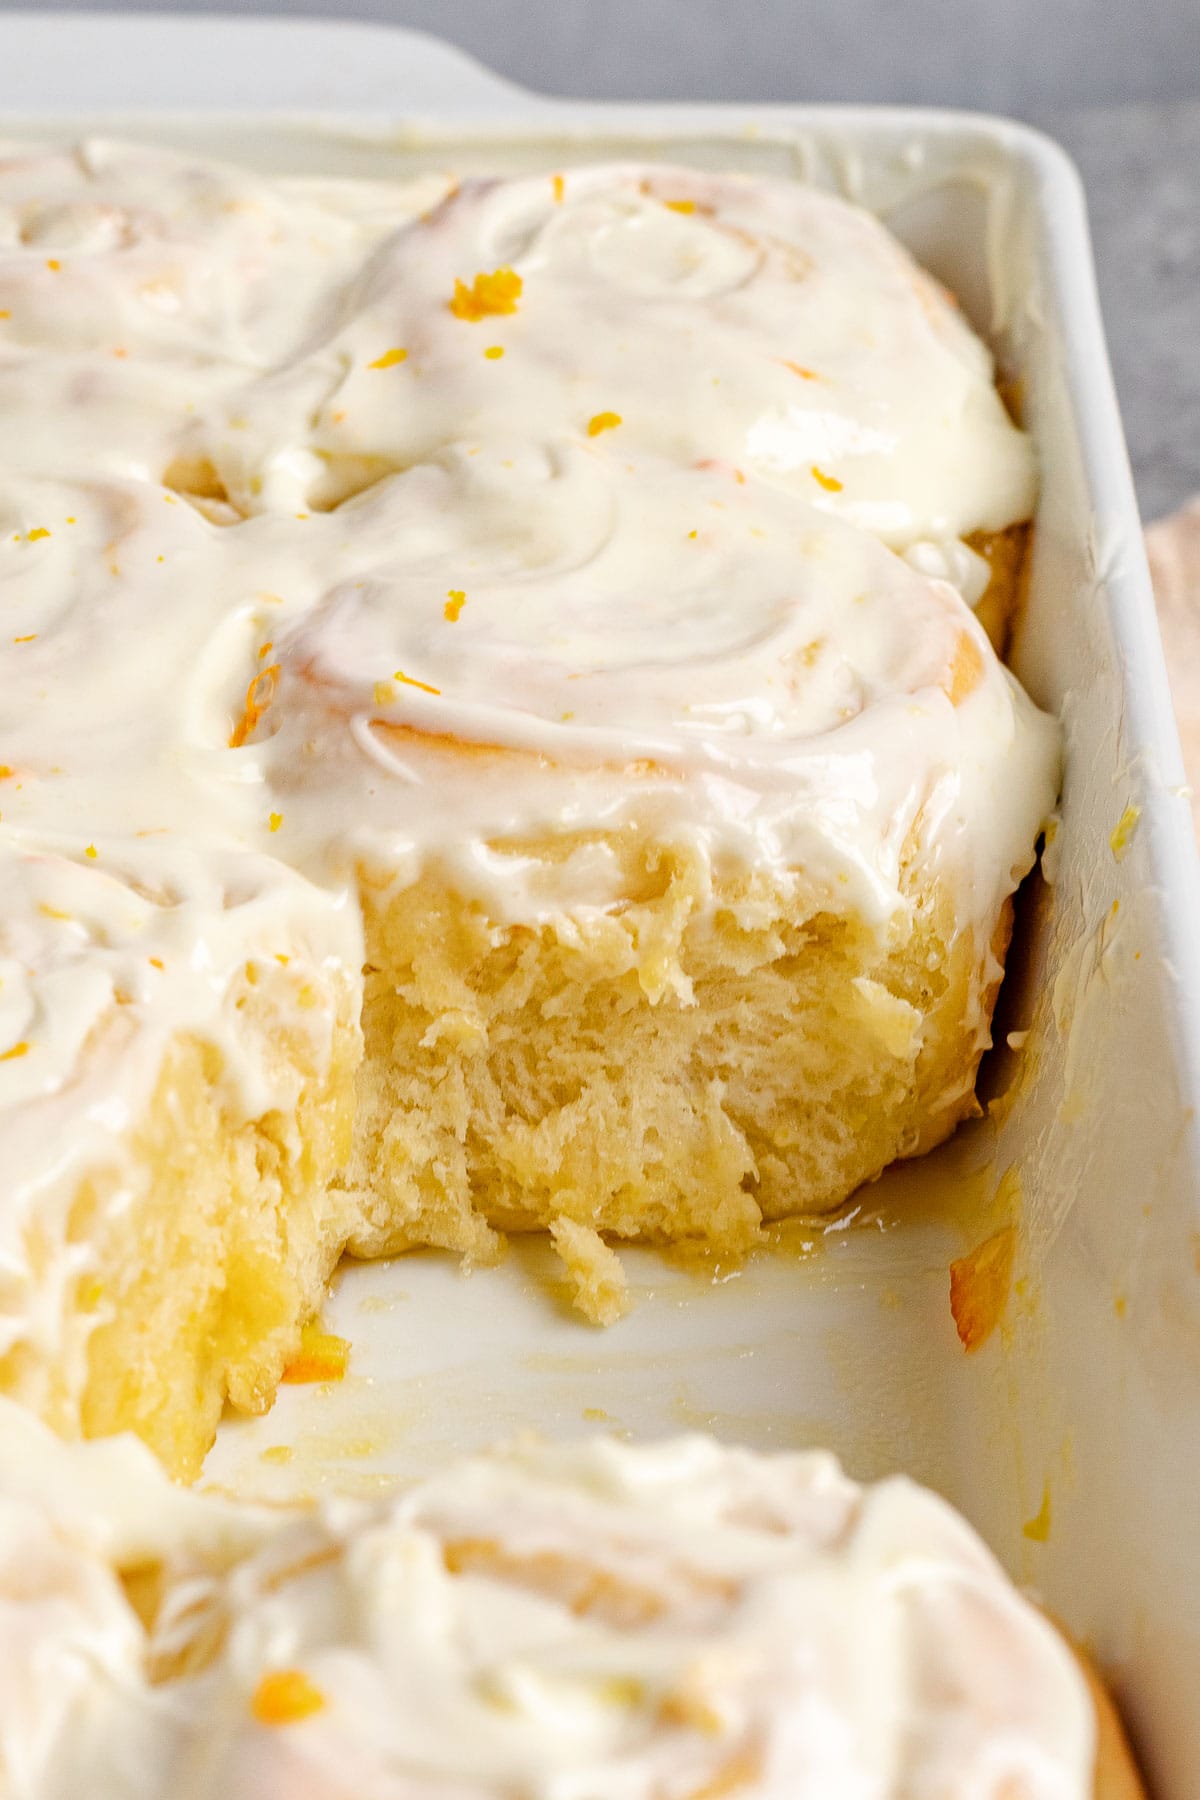 Orange Rolls with frosting in baking pan